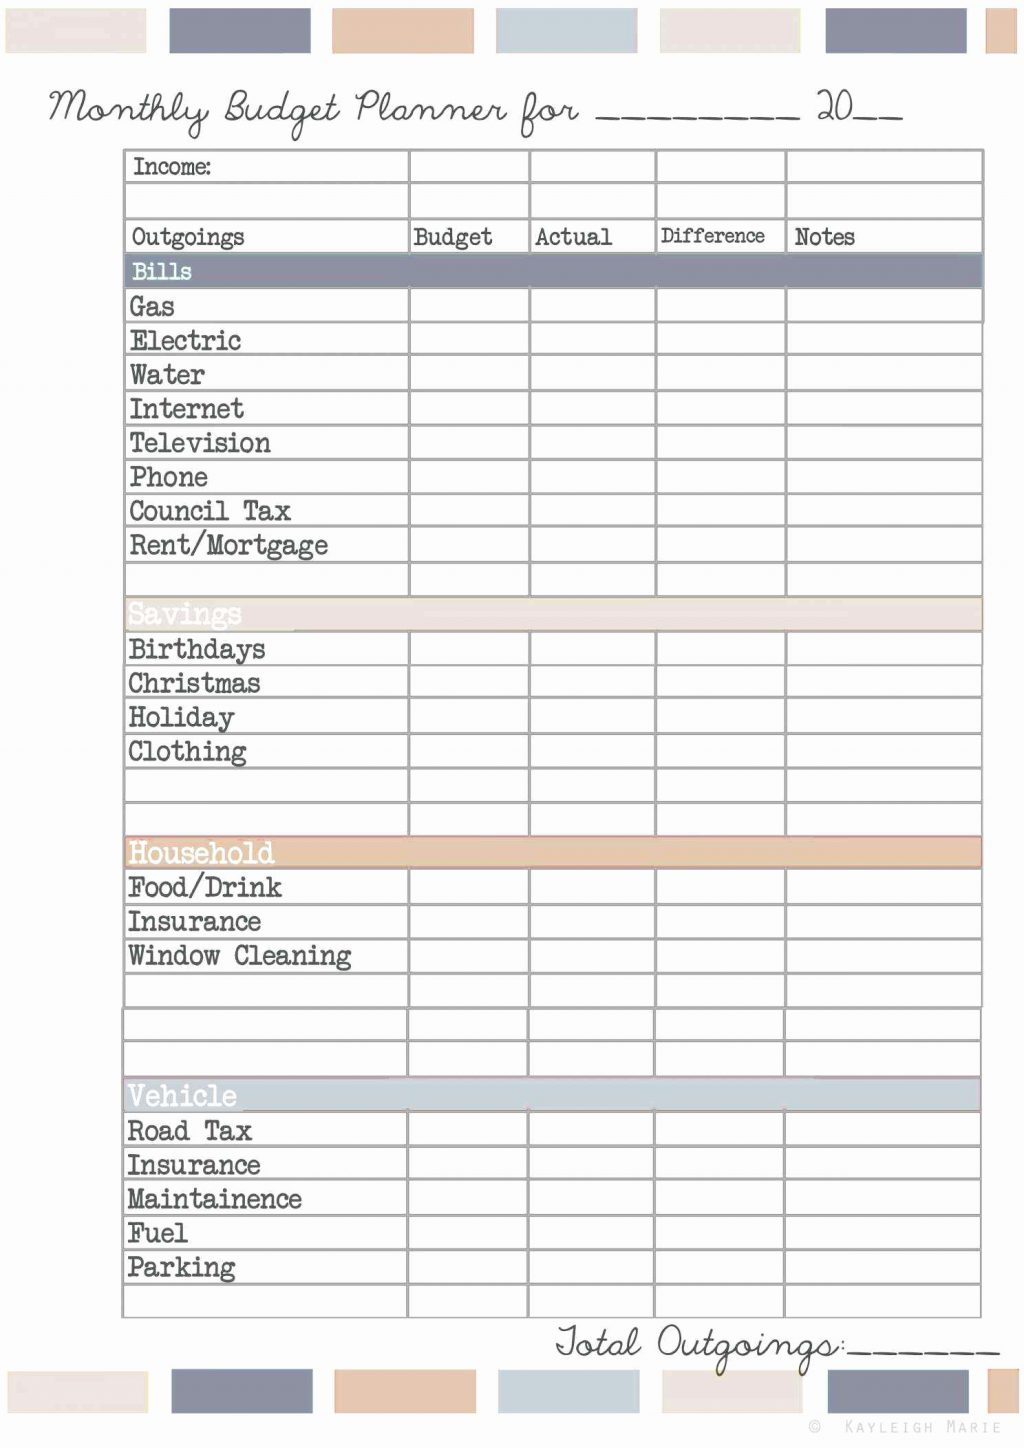 Rental Property Expenses Spreadsheet As How To Make An Excel Throughout Rental Expense Spreadsheet